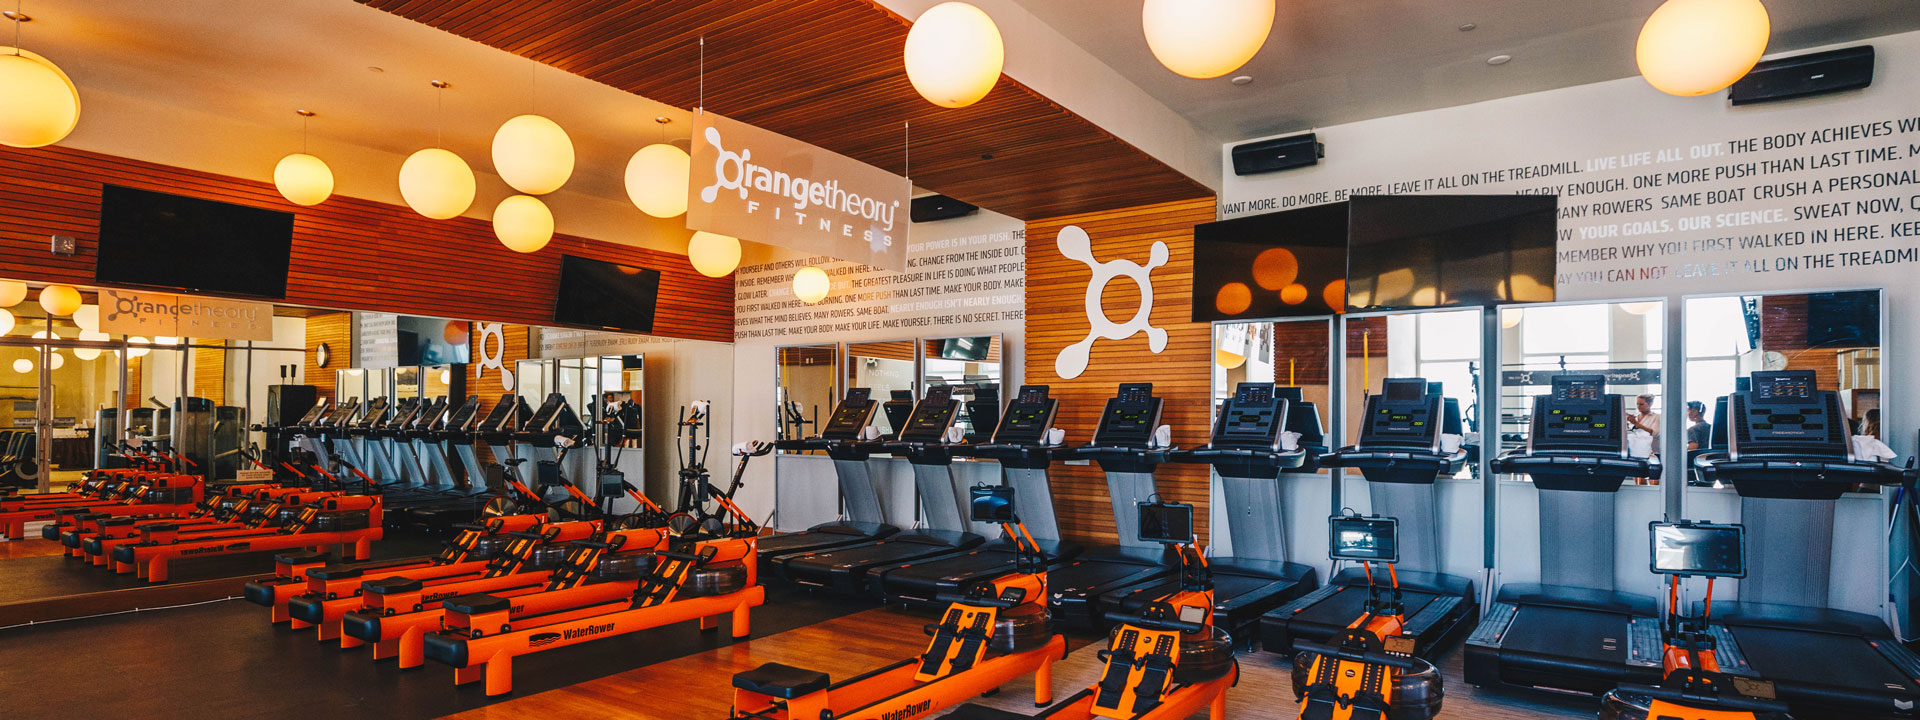 Orangetheory Fitness Opens Their Largest Texas Studio in Central